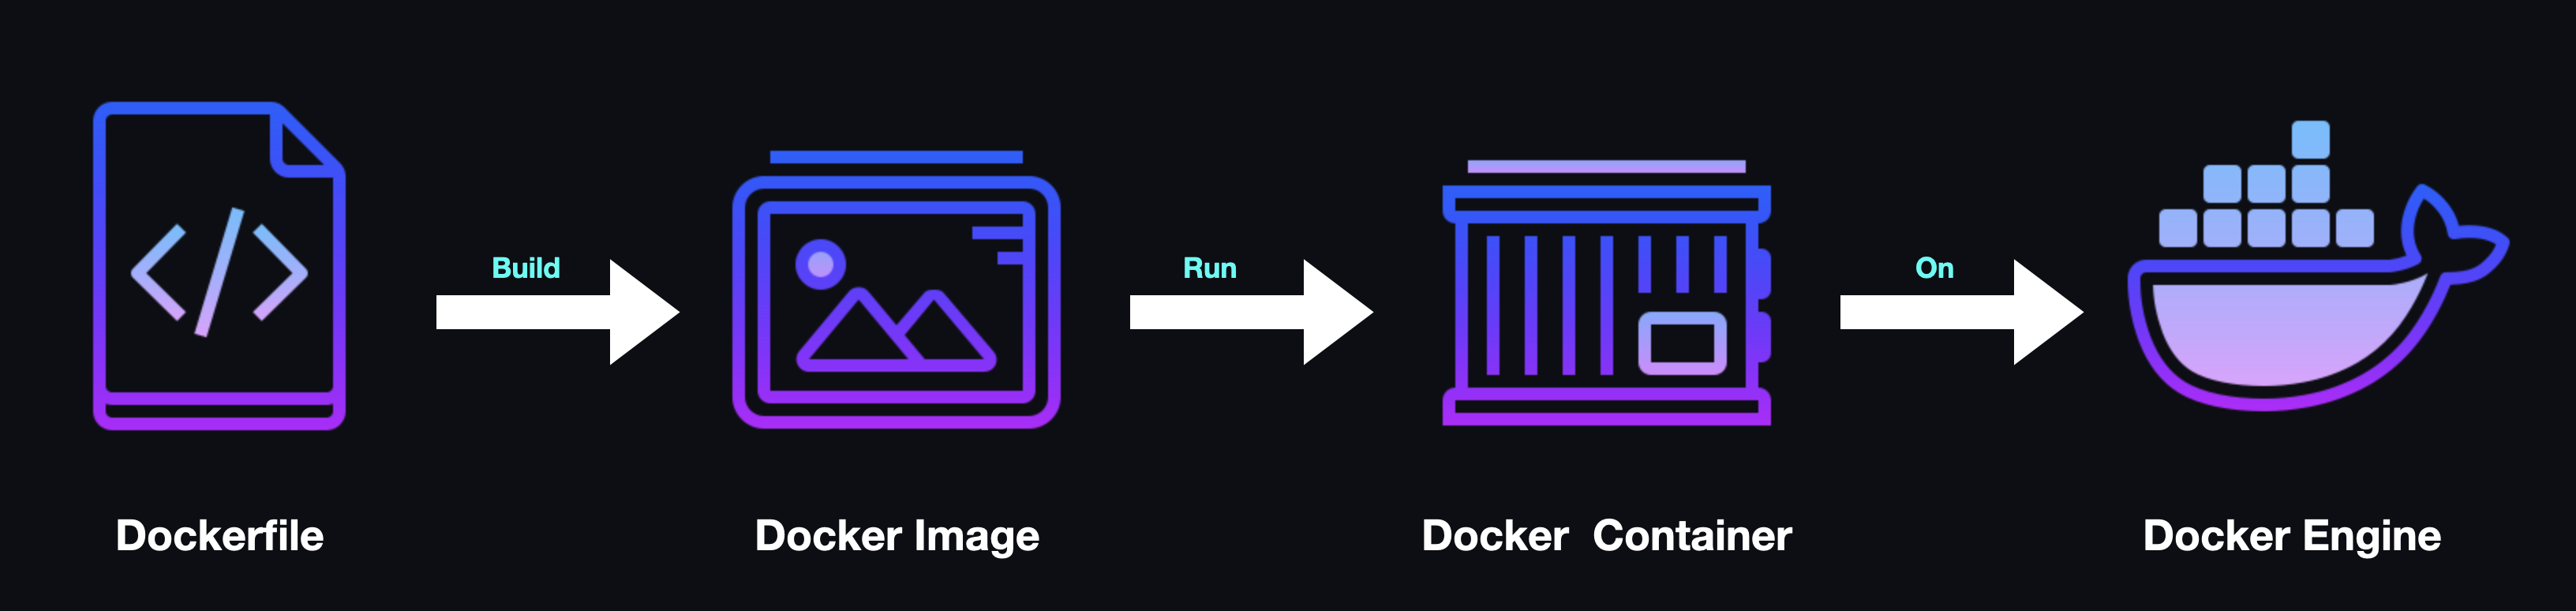 An image representing a sequence of events from creating a dockerfile, making a docker image, and running a docker container on the docker engine.